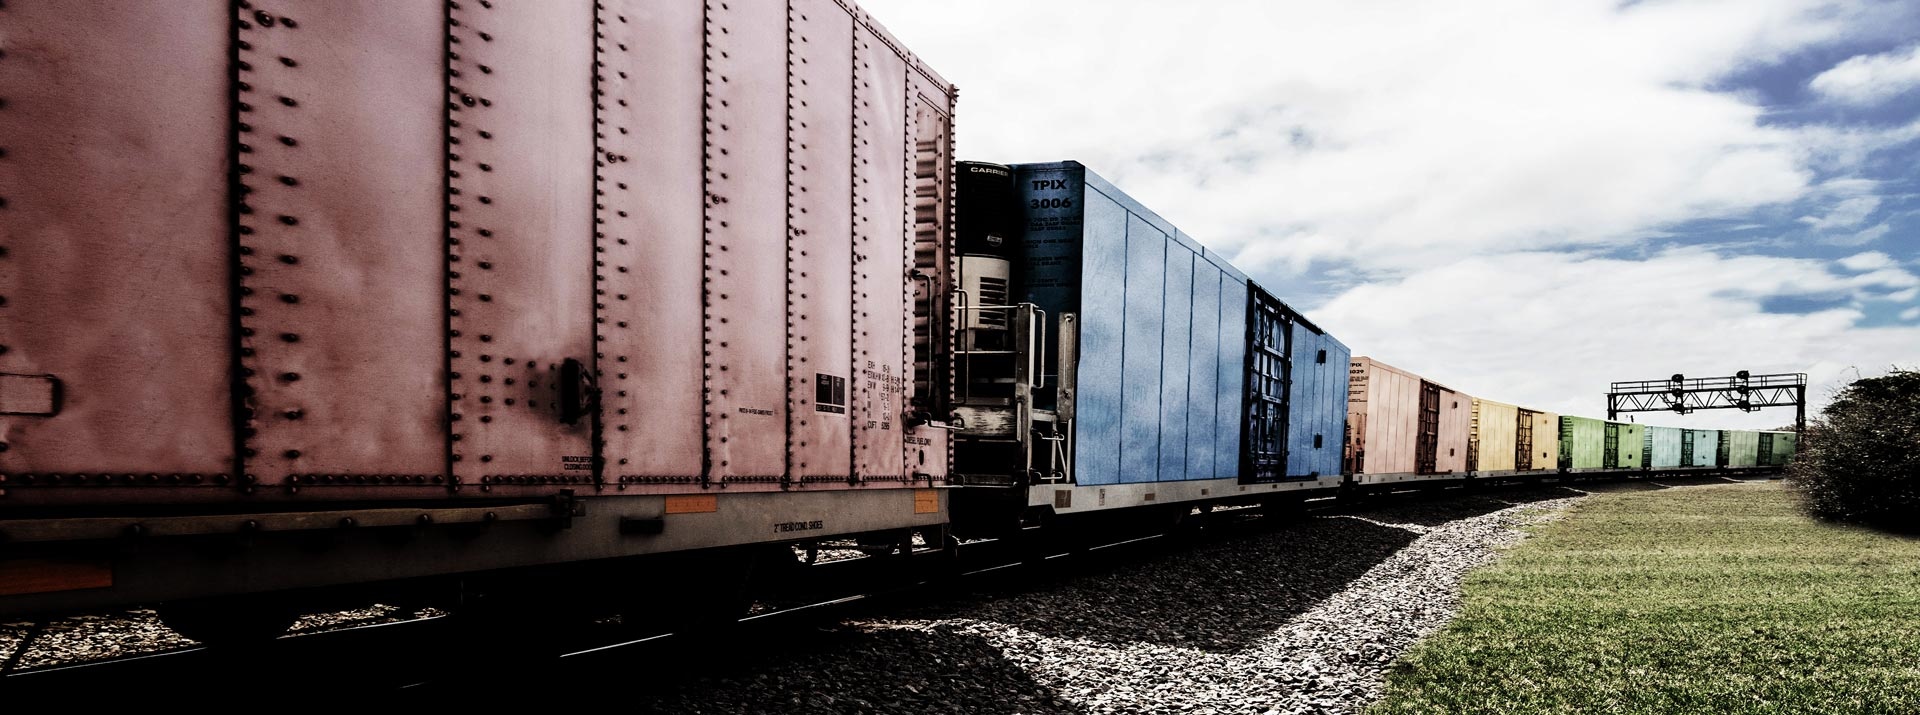 Freight-train-with-containers-on-track